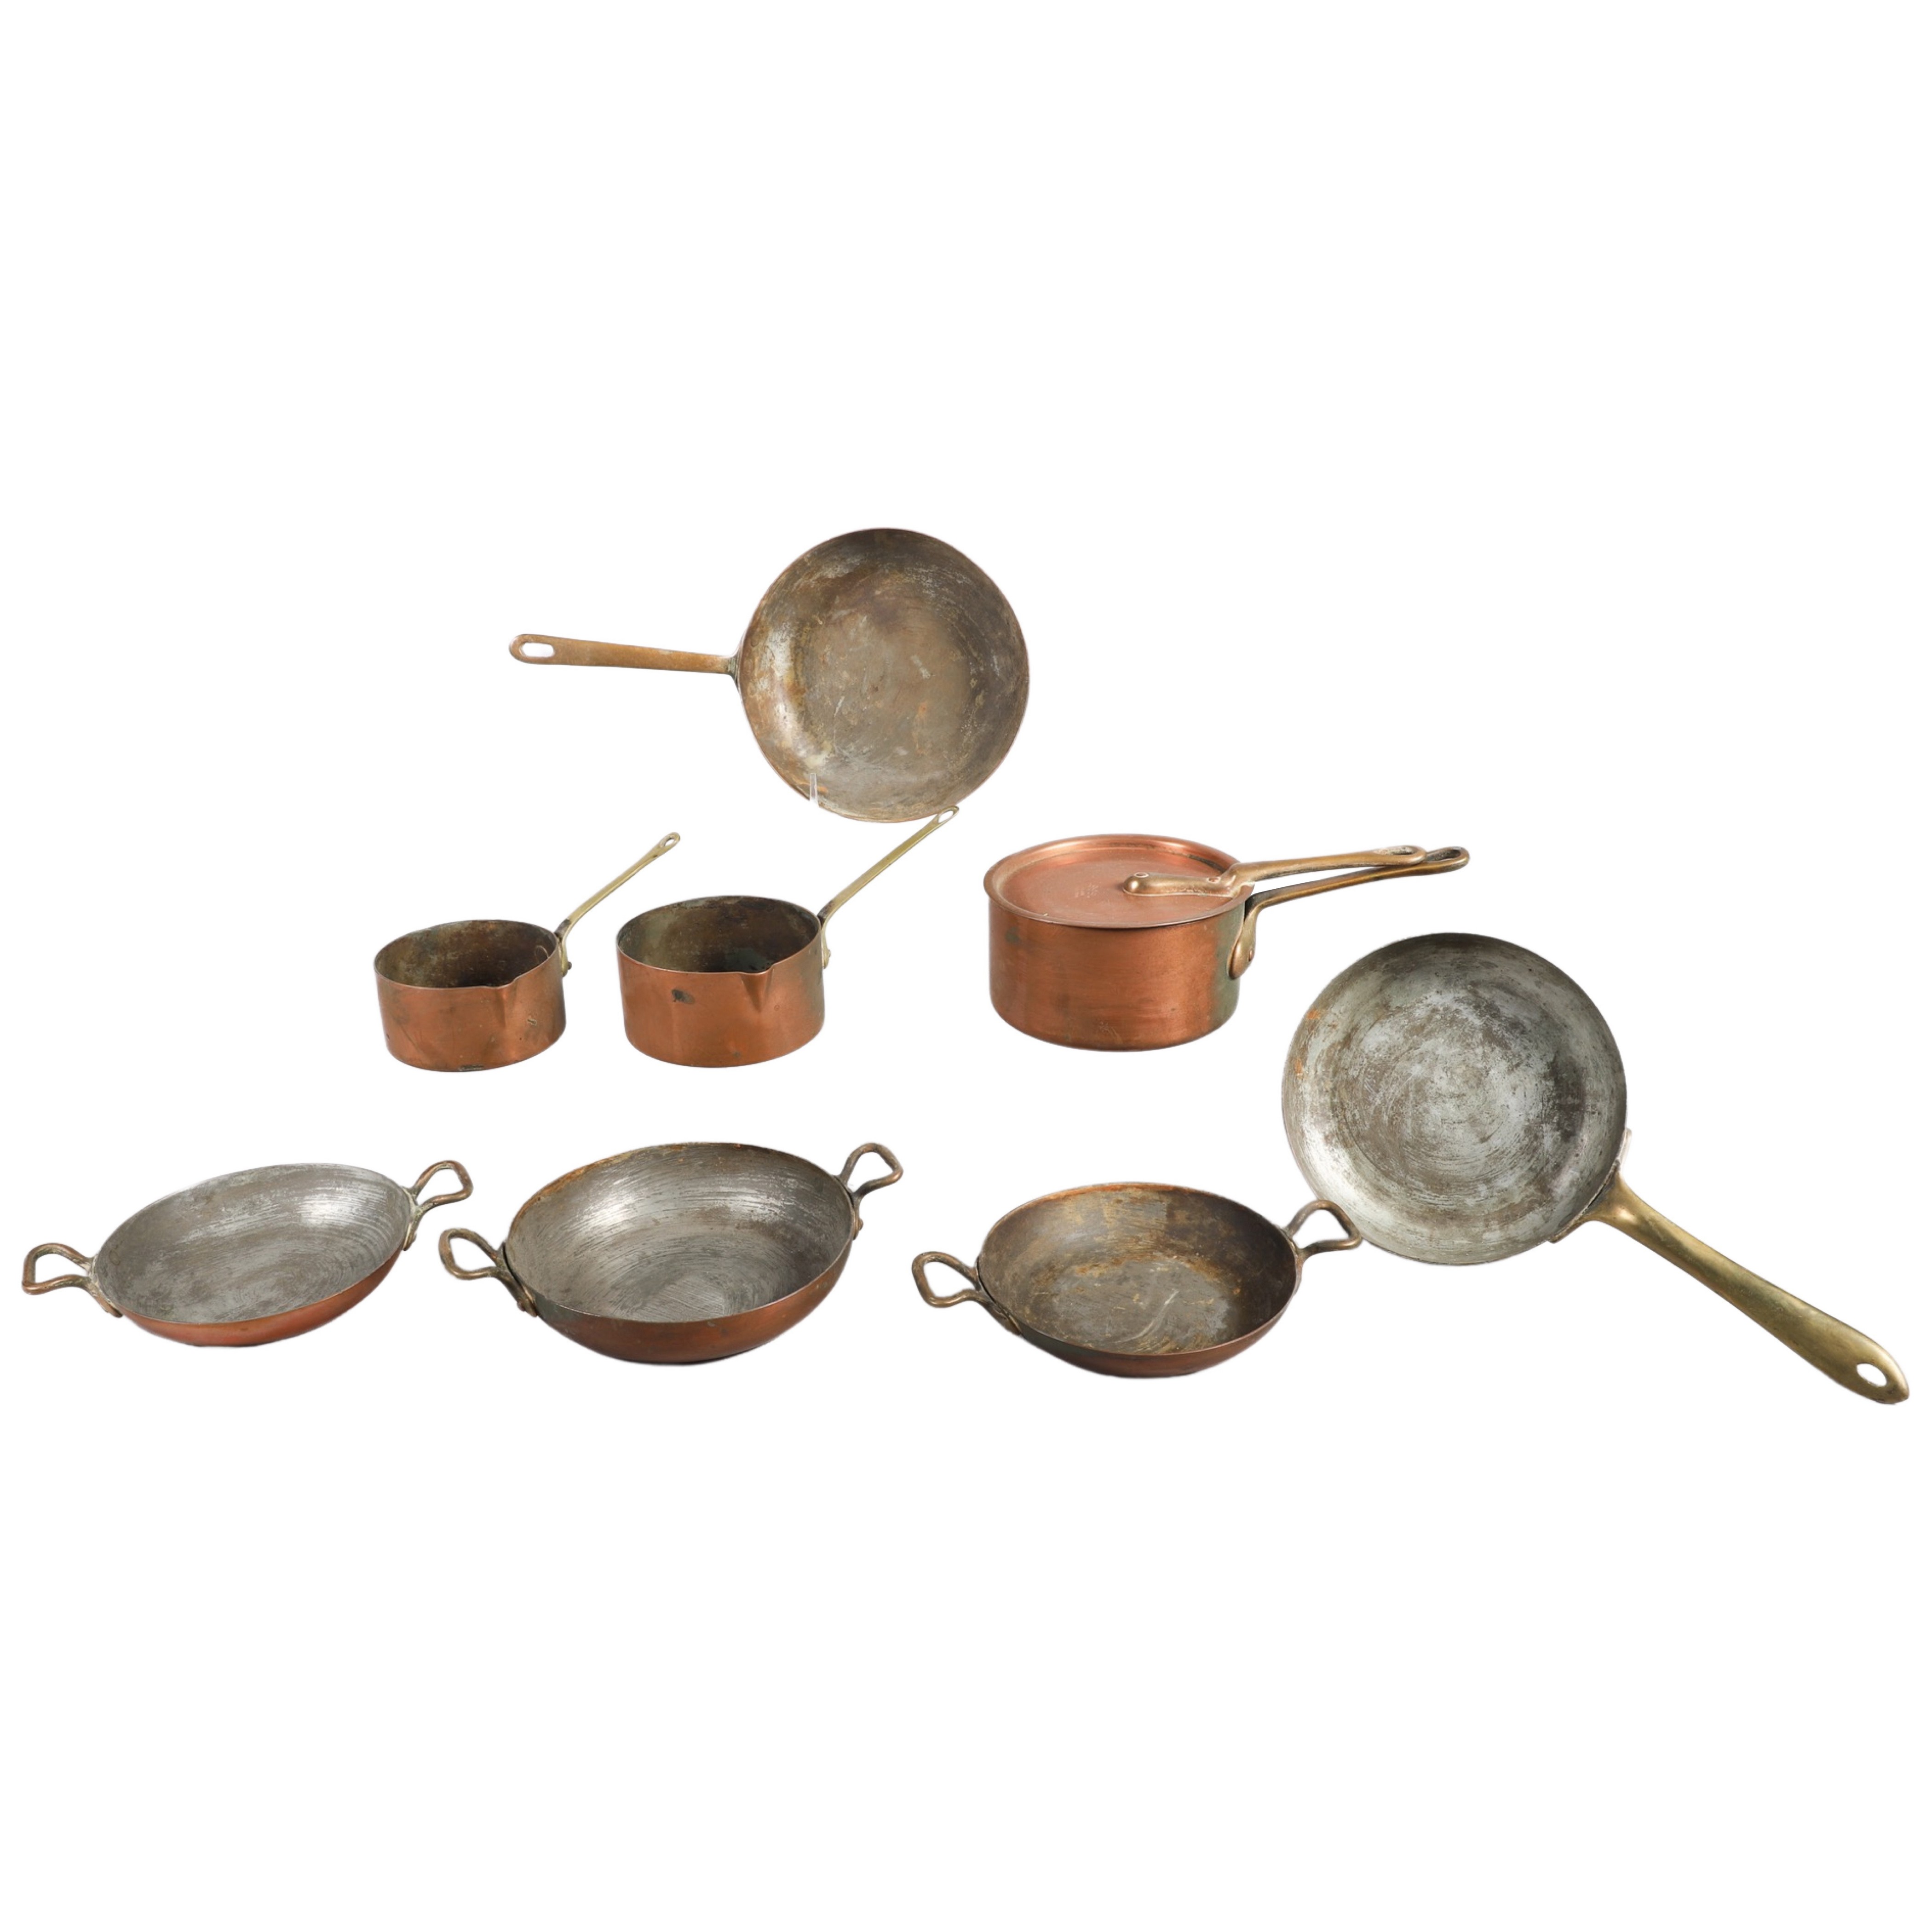  9 Small copper clad cooking implements 310019